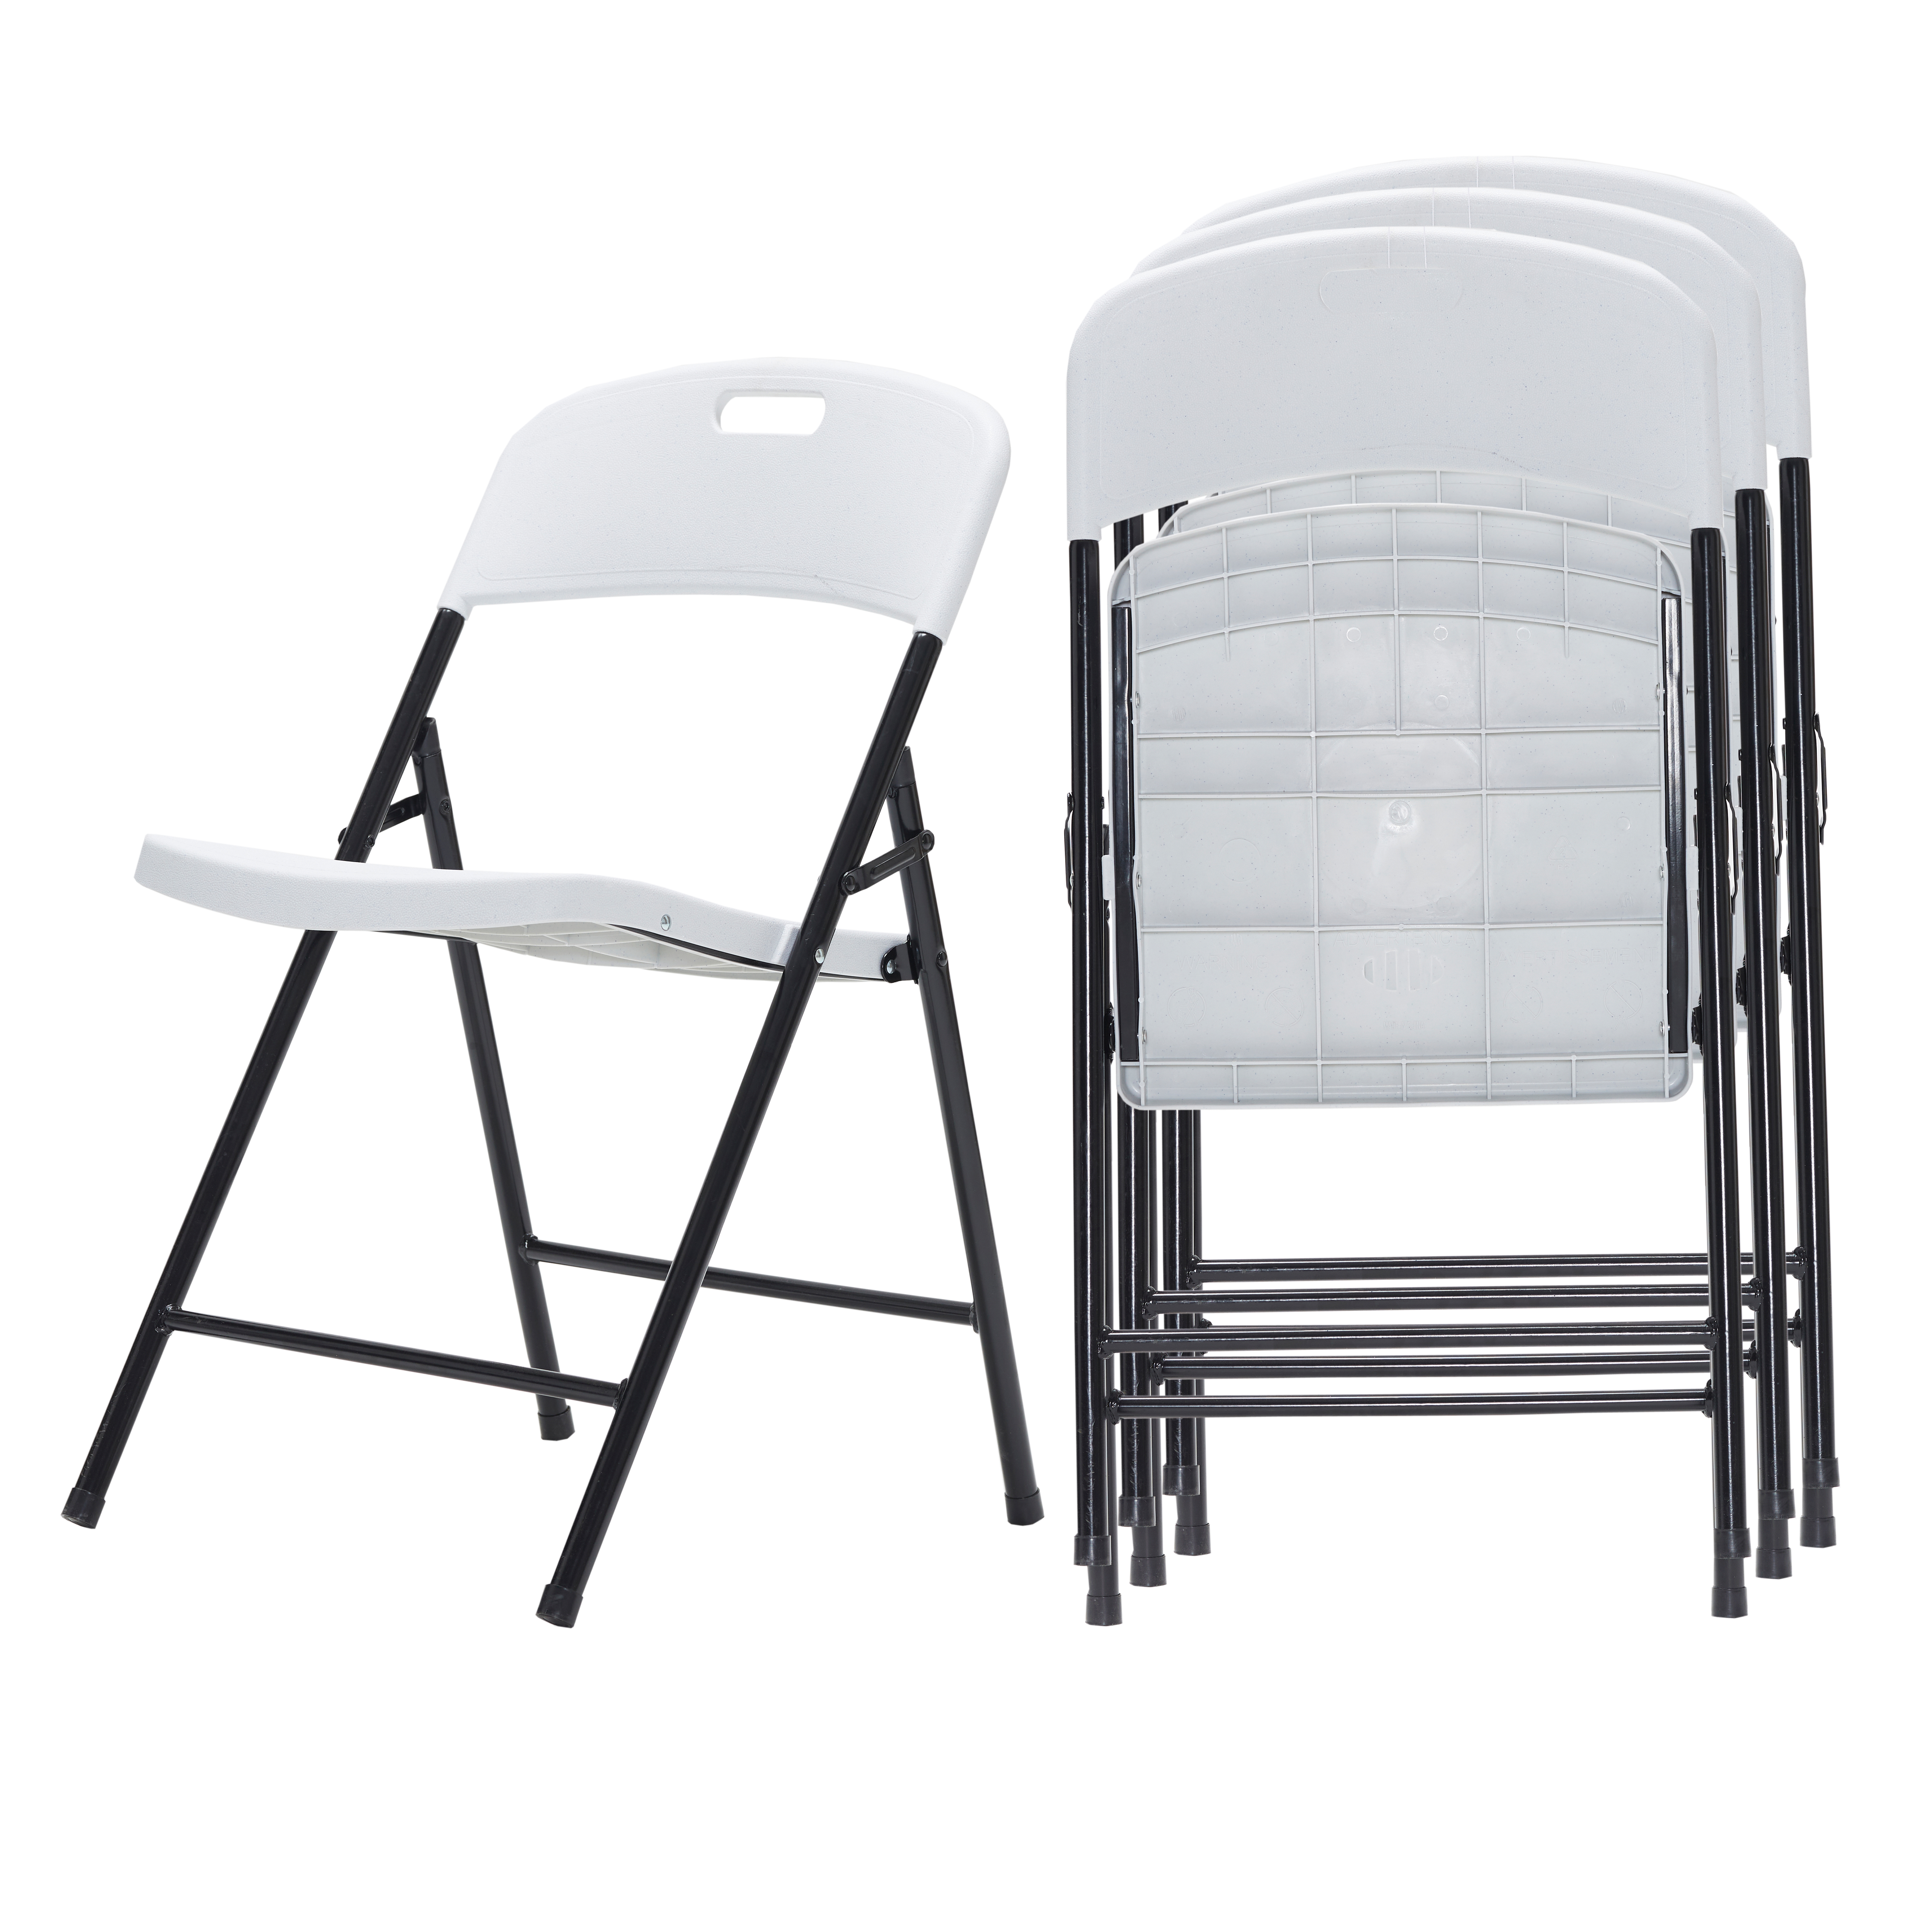 4 Pack Portable Plastic Folding Chairs, Sturdy Design, Indoor/Outdoor Events, Perfect for Camping/Picnic/Tailgating/Party, Easy to Clean, White-CASAINC